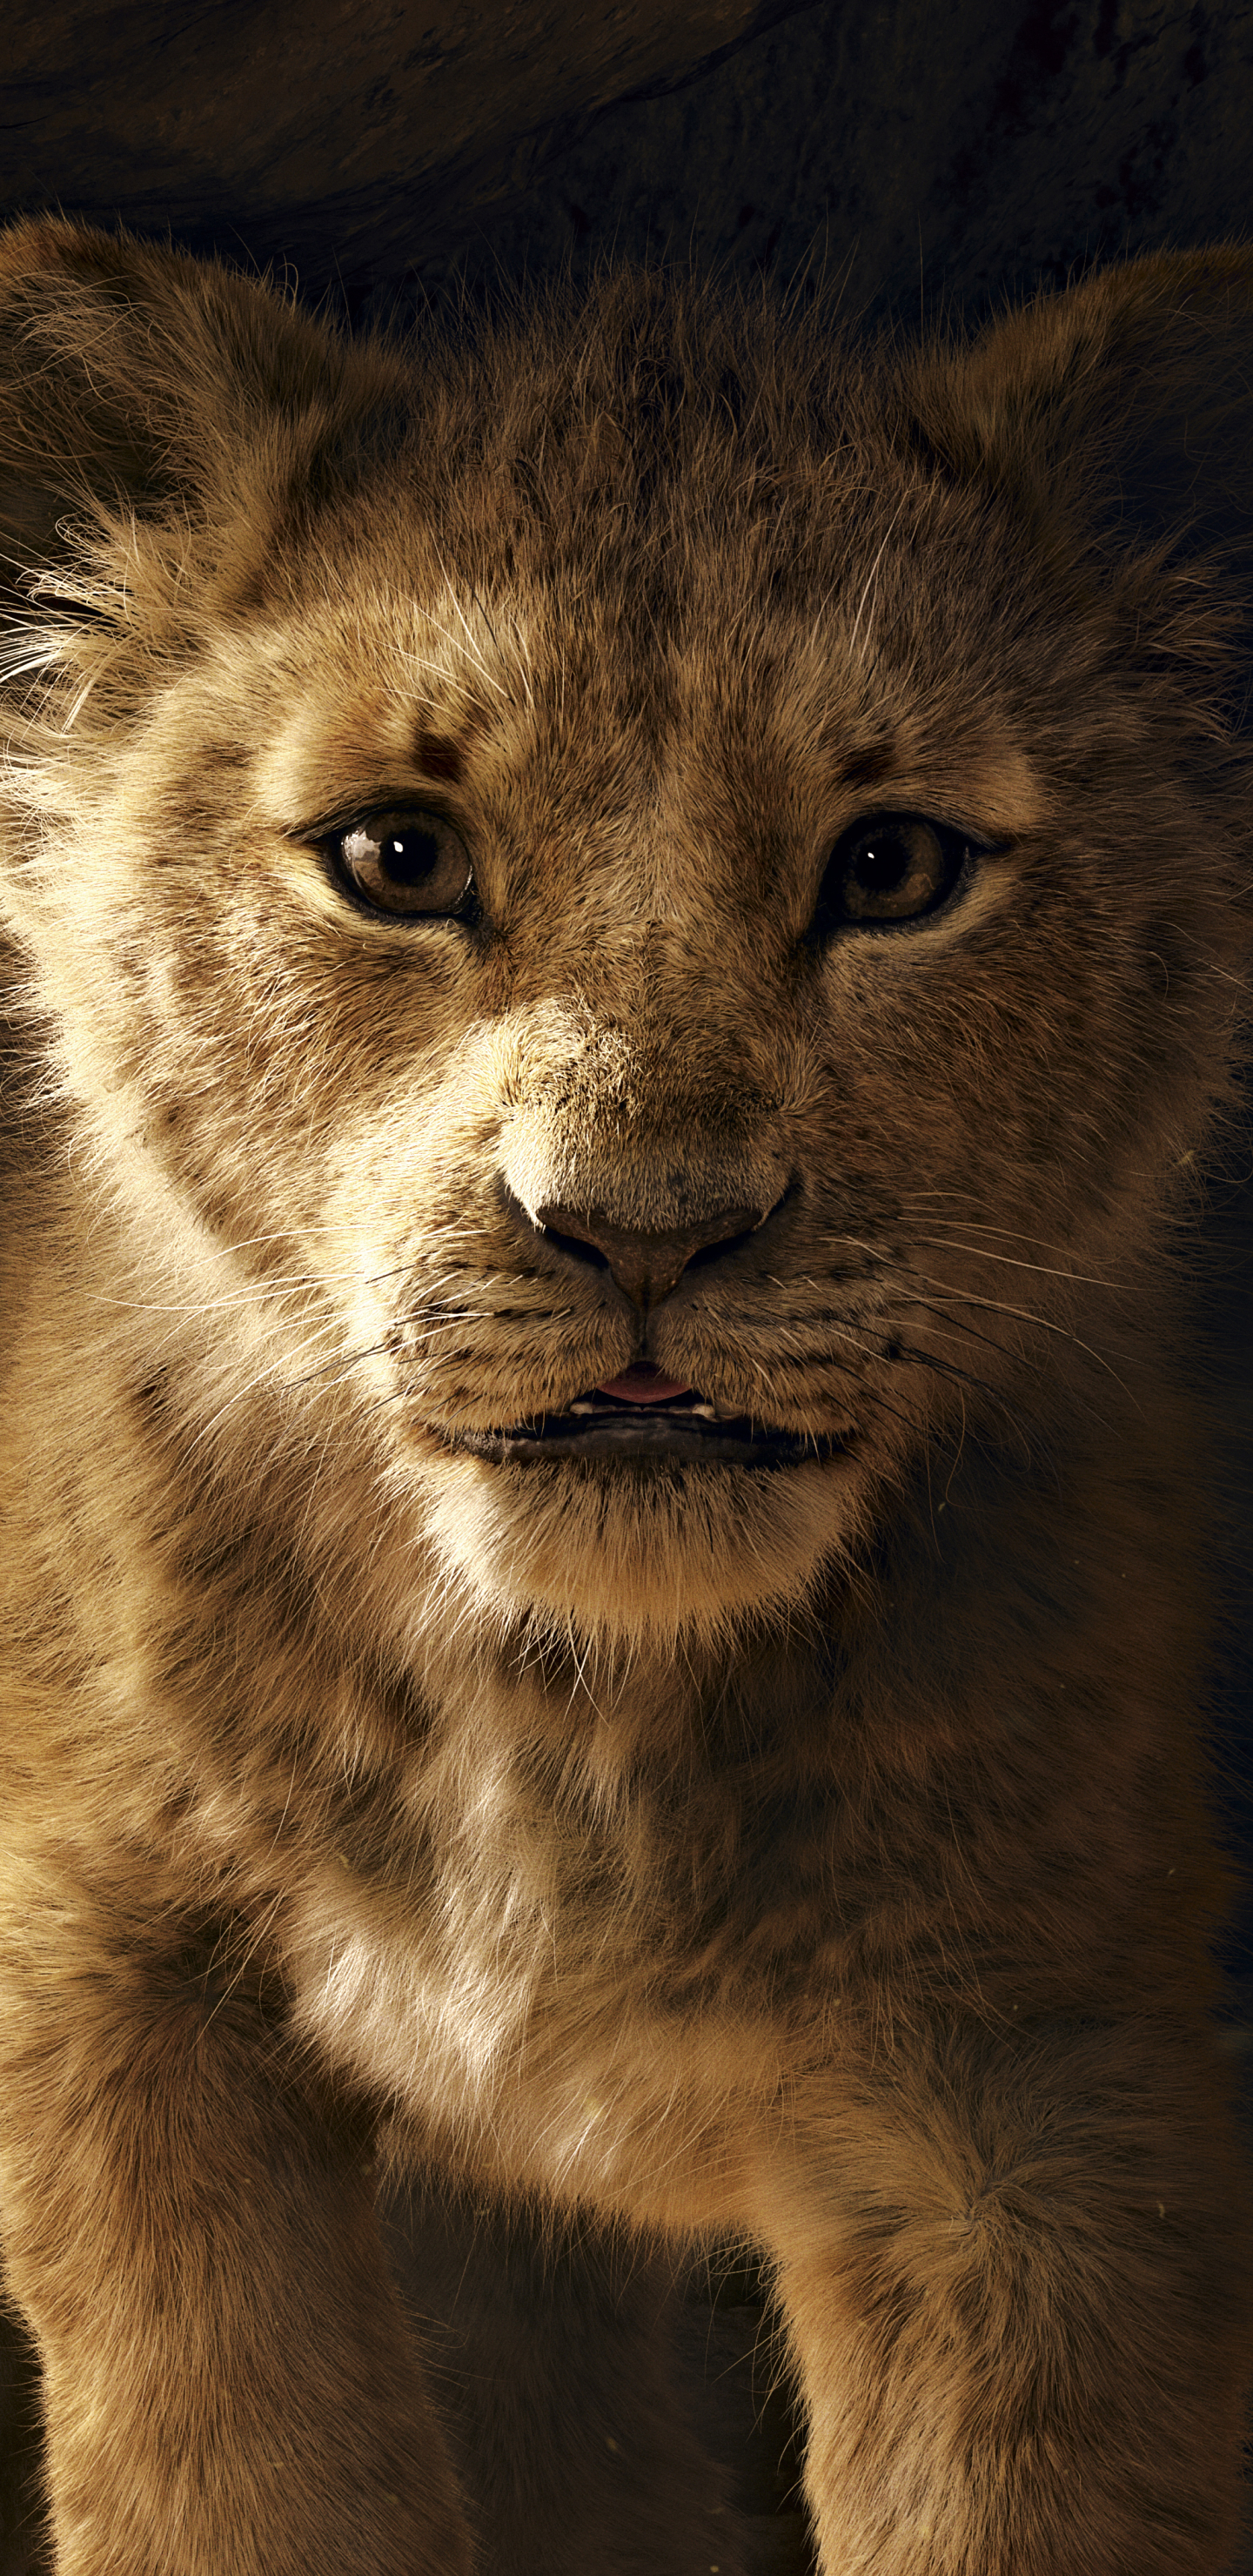 simba, movie, the lion king (2019) cell phone wallpapers